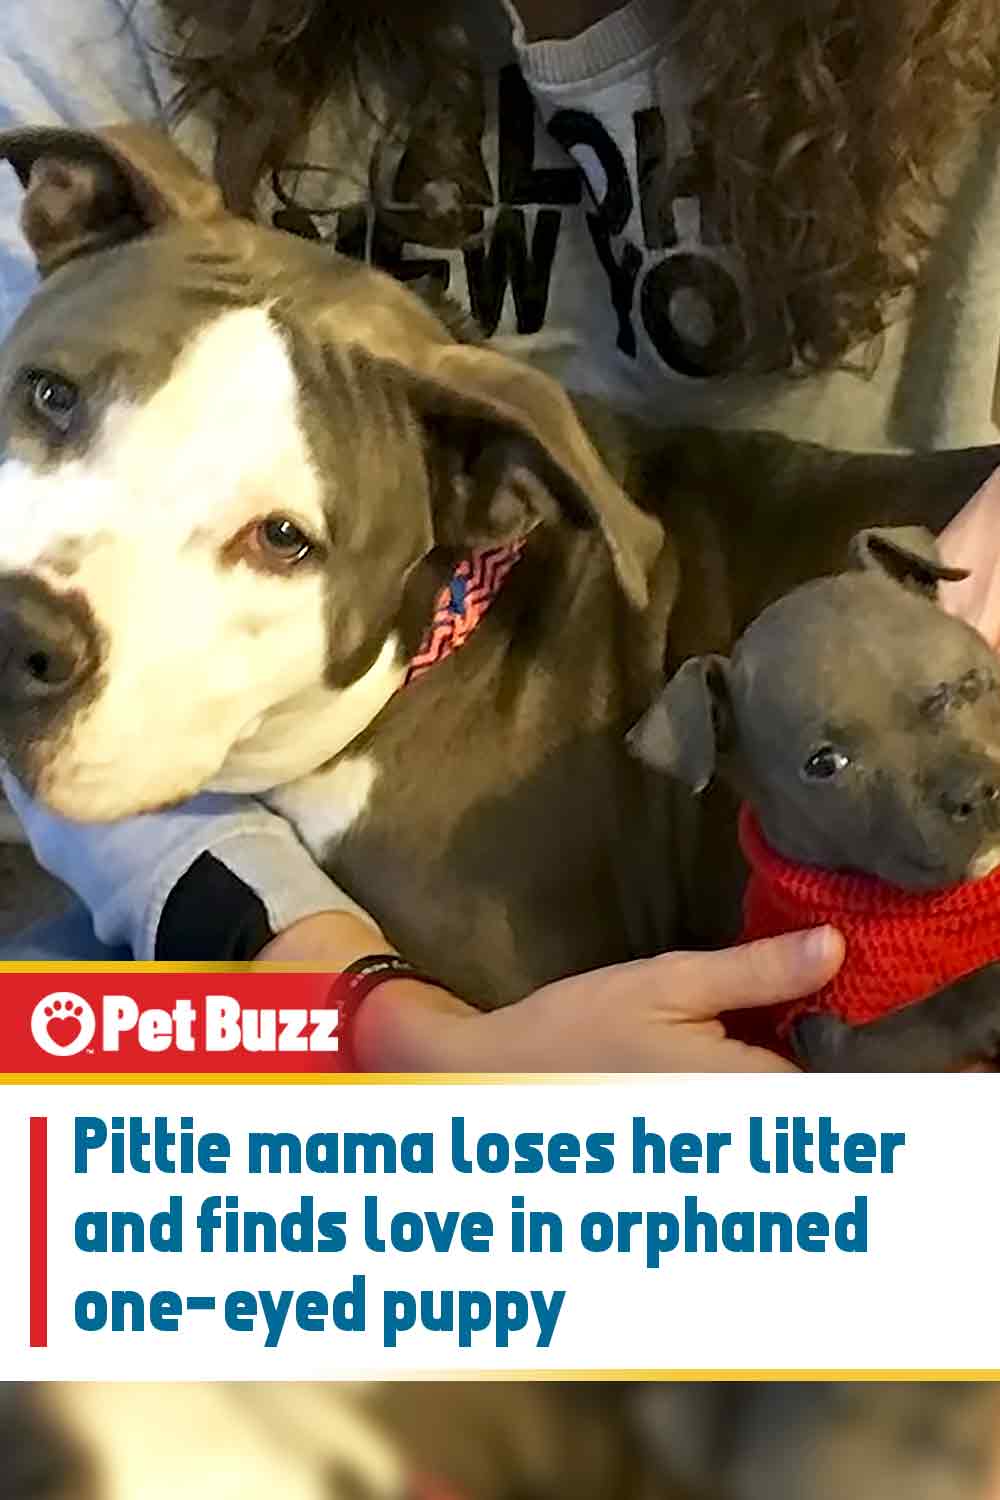 Pittie mama loses her litter and finds love in orphaned one-eyed puppy